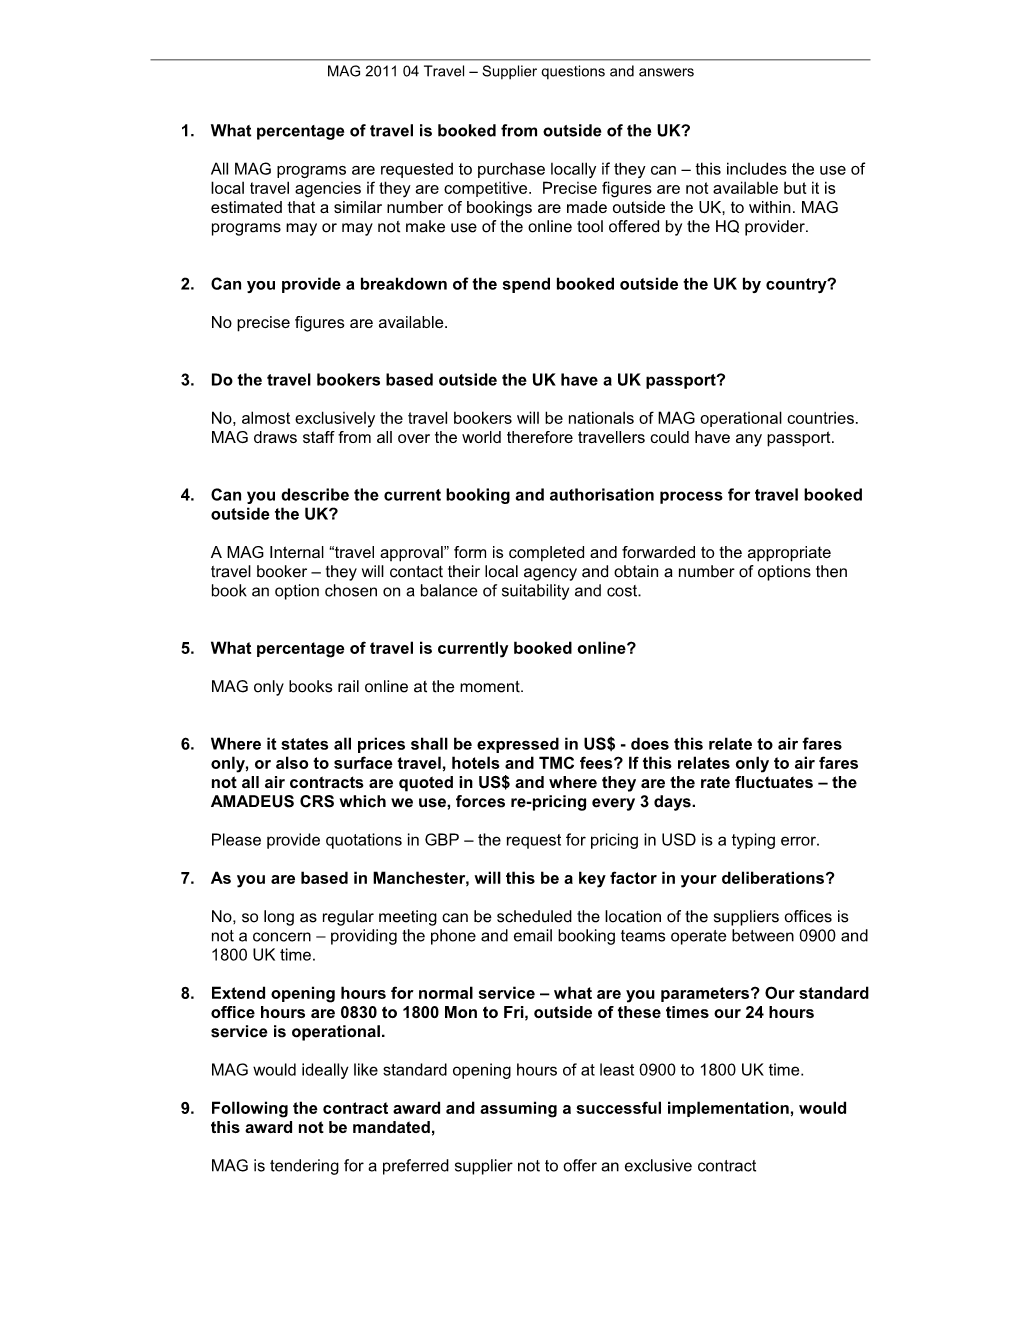 MAG 2011 04 Travel Supplier Questions and Answers